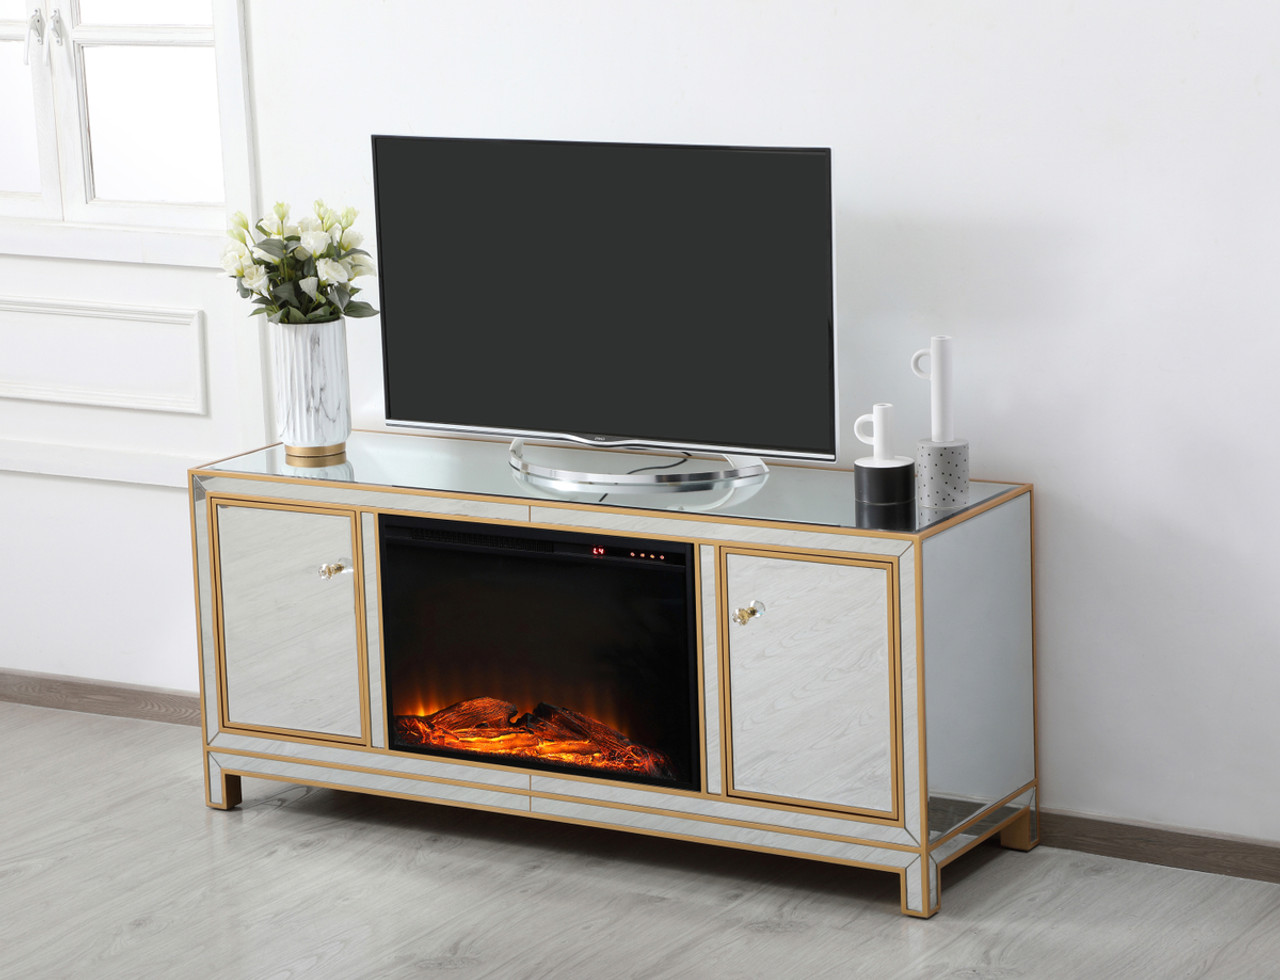 Elegant Decor MF701G-F1 Reflexion 60 in. mirrored tv stand with wood fireplace in gold